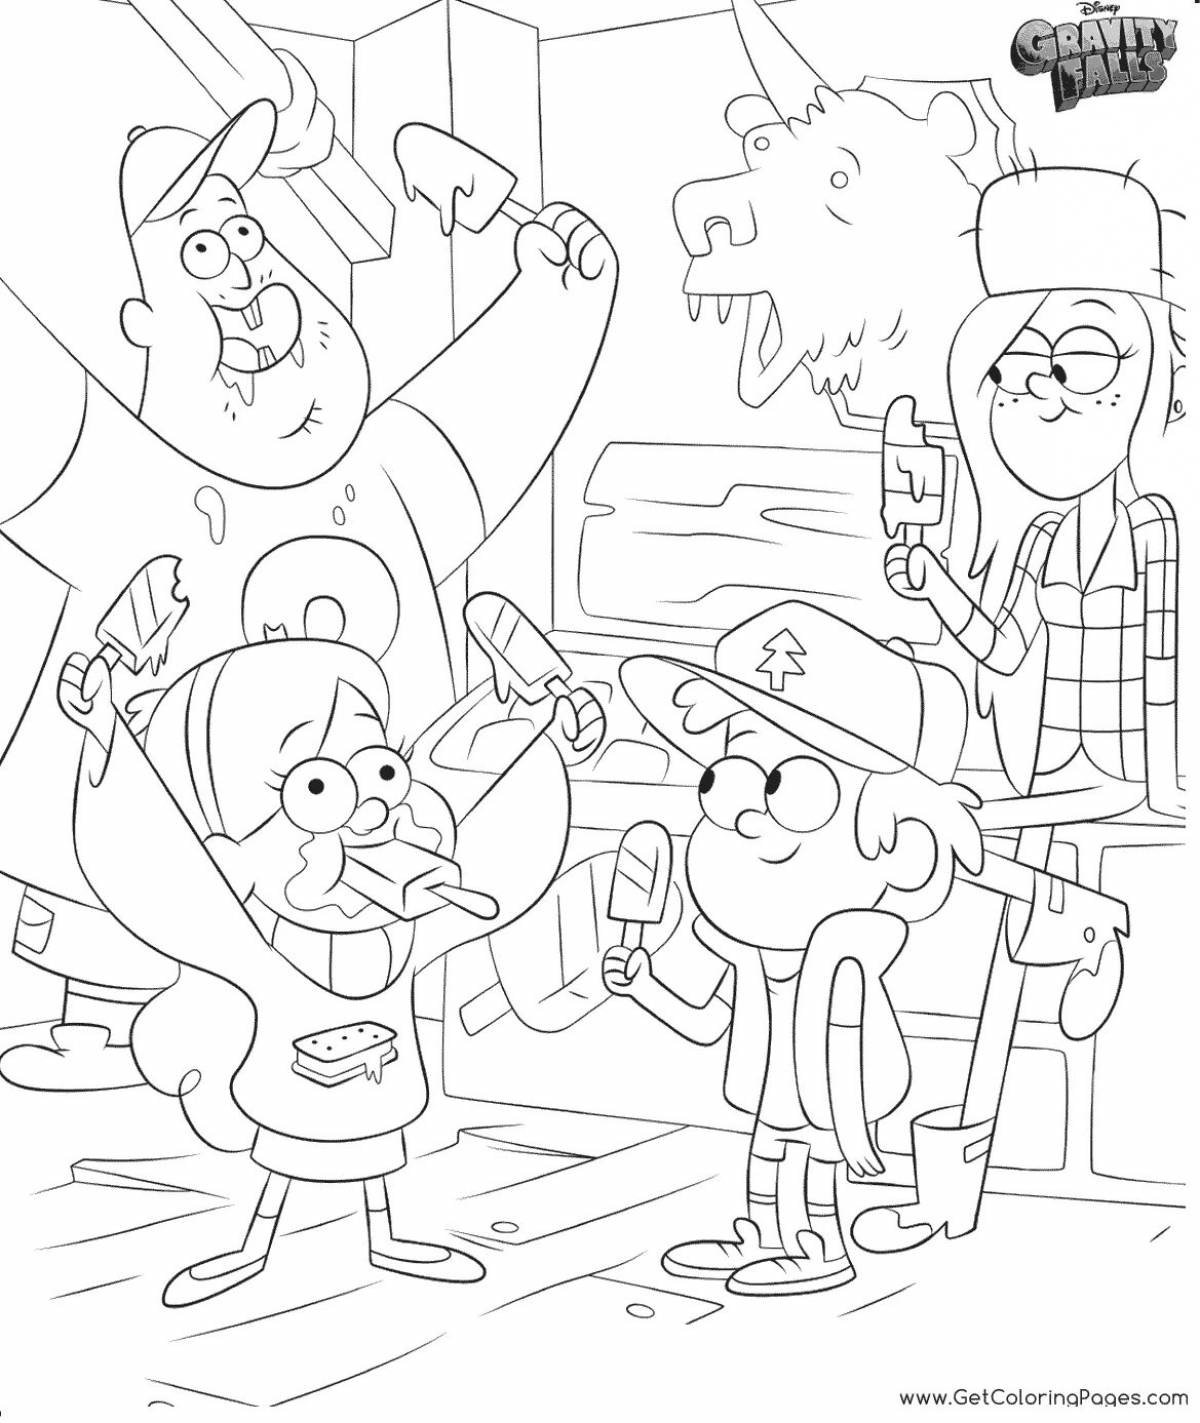 Gravity falls soo live coloring page